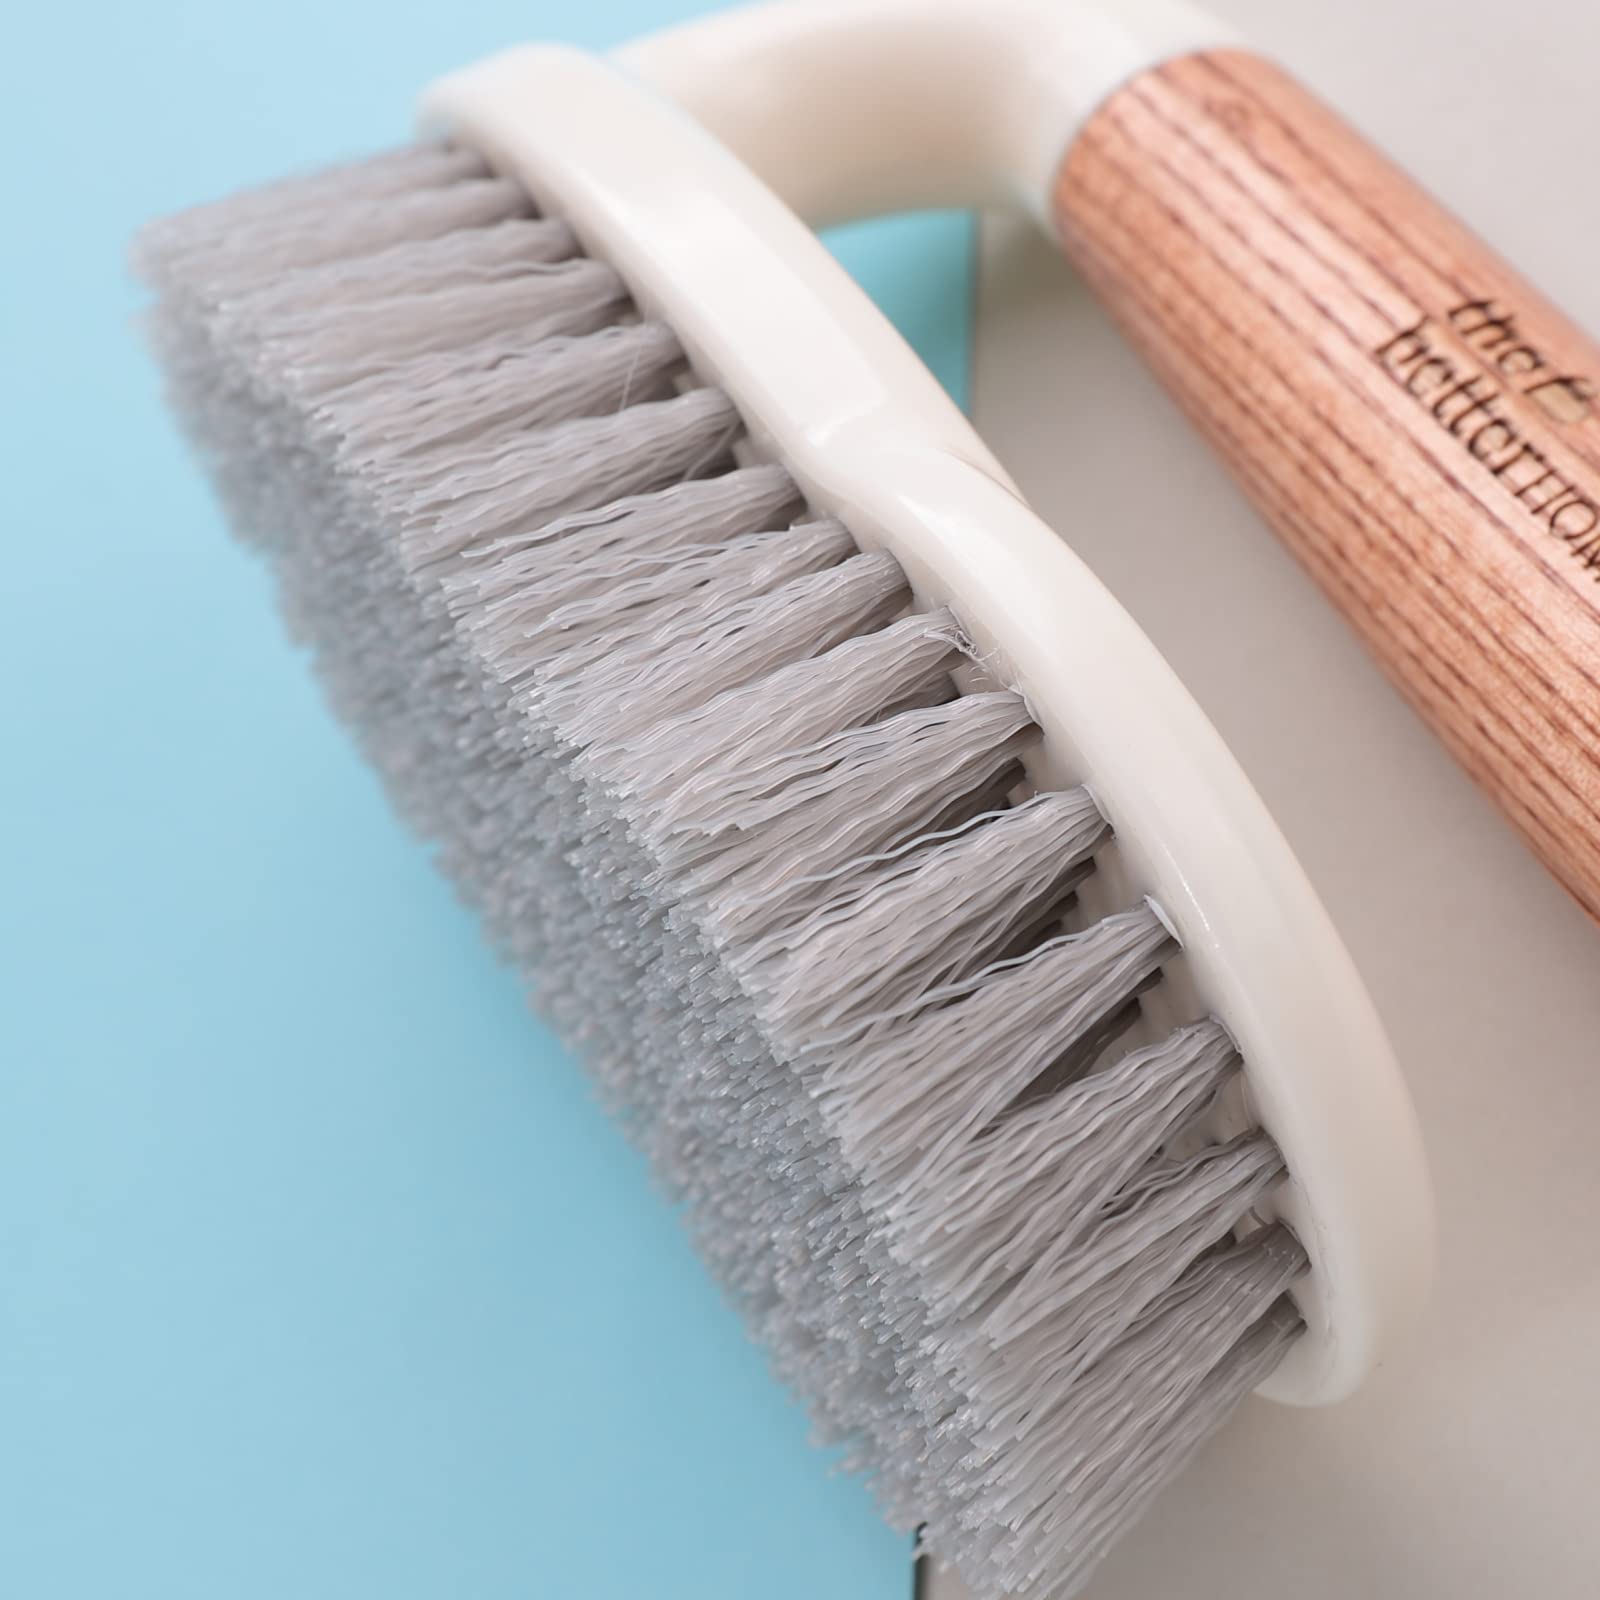 The Better Home Wooden Multi-Purpose Cleaning Brush | Scrubber for Kitchen | Cleaning Brush for Bathroom & All Surfaces | Wet and Dry Tile Cleaner Brush (Scrubber)